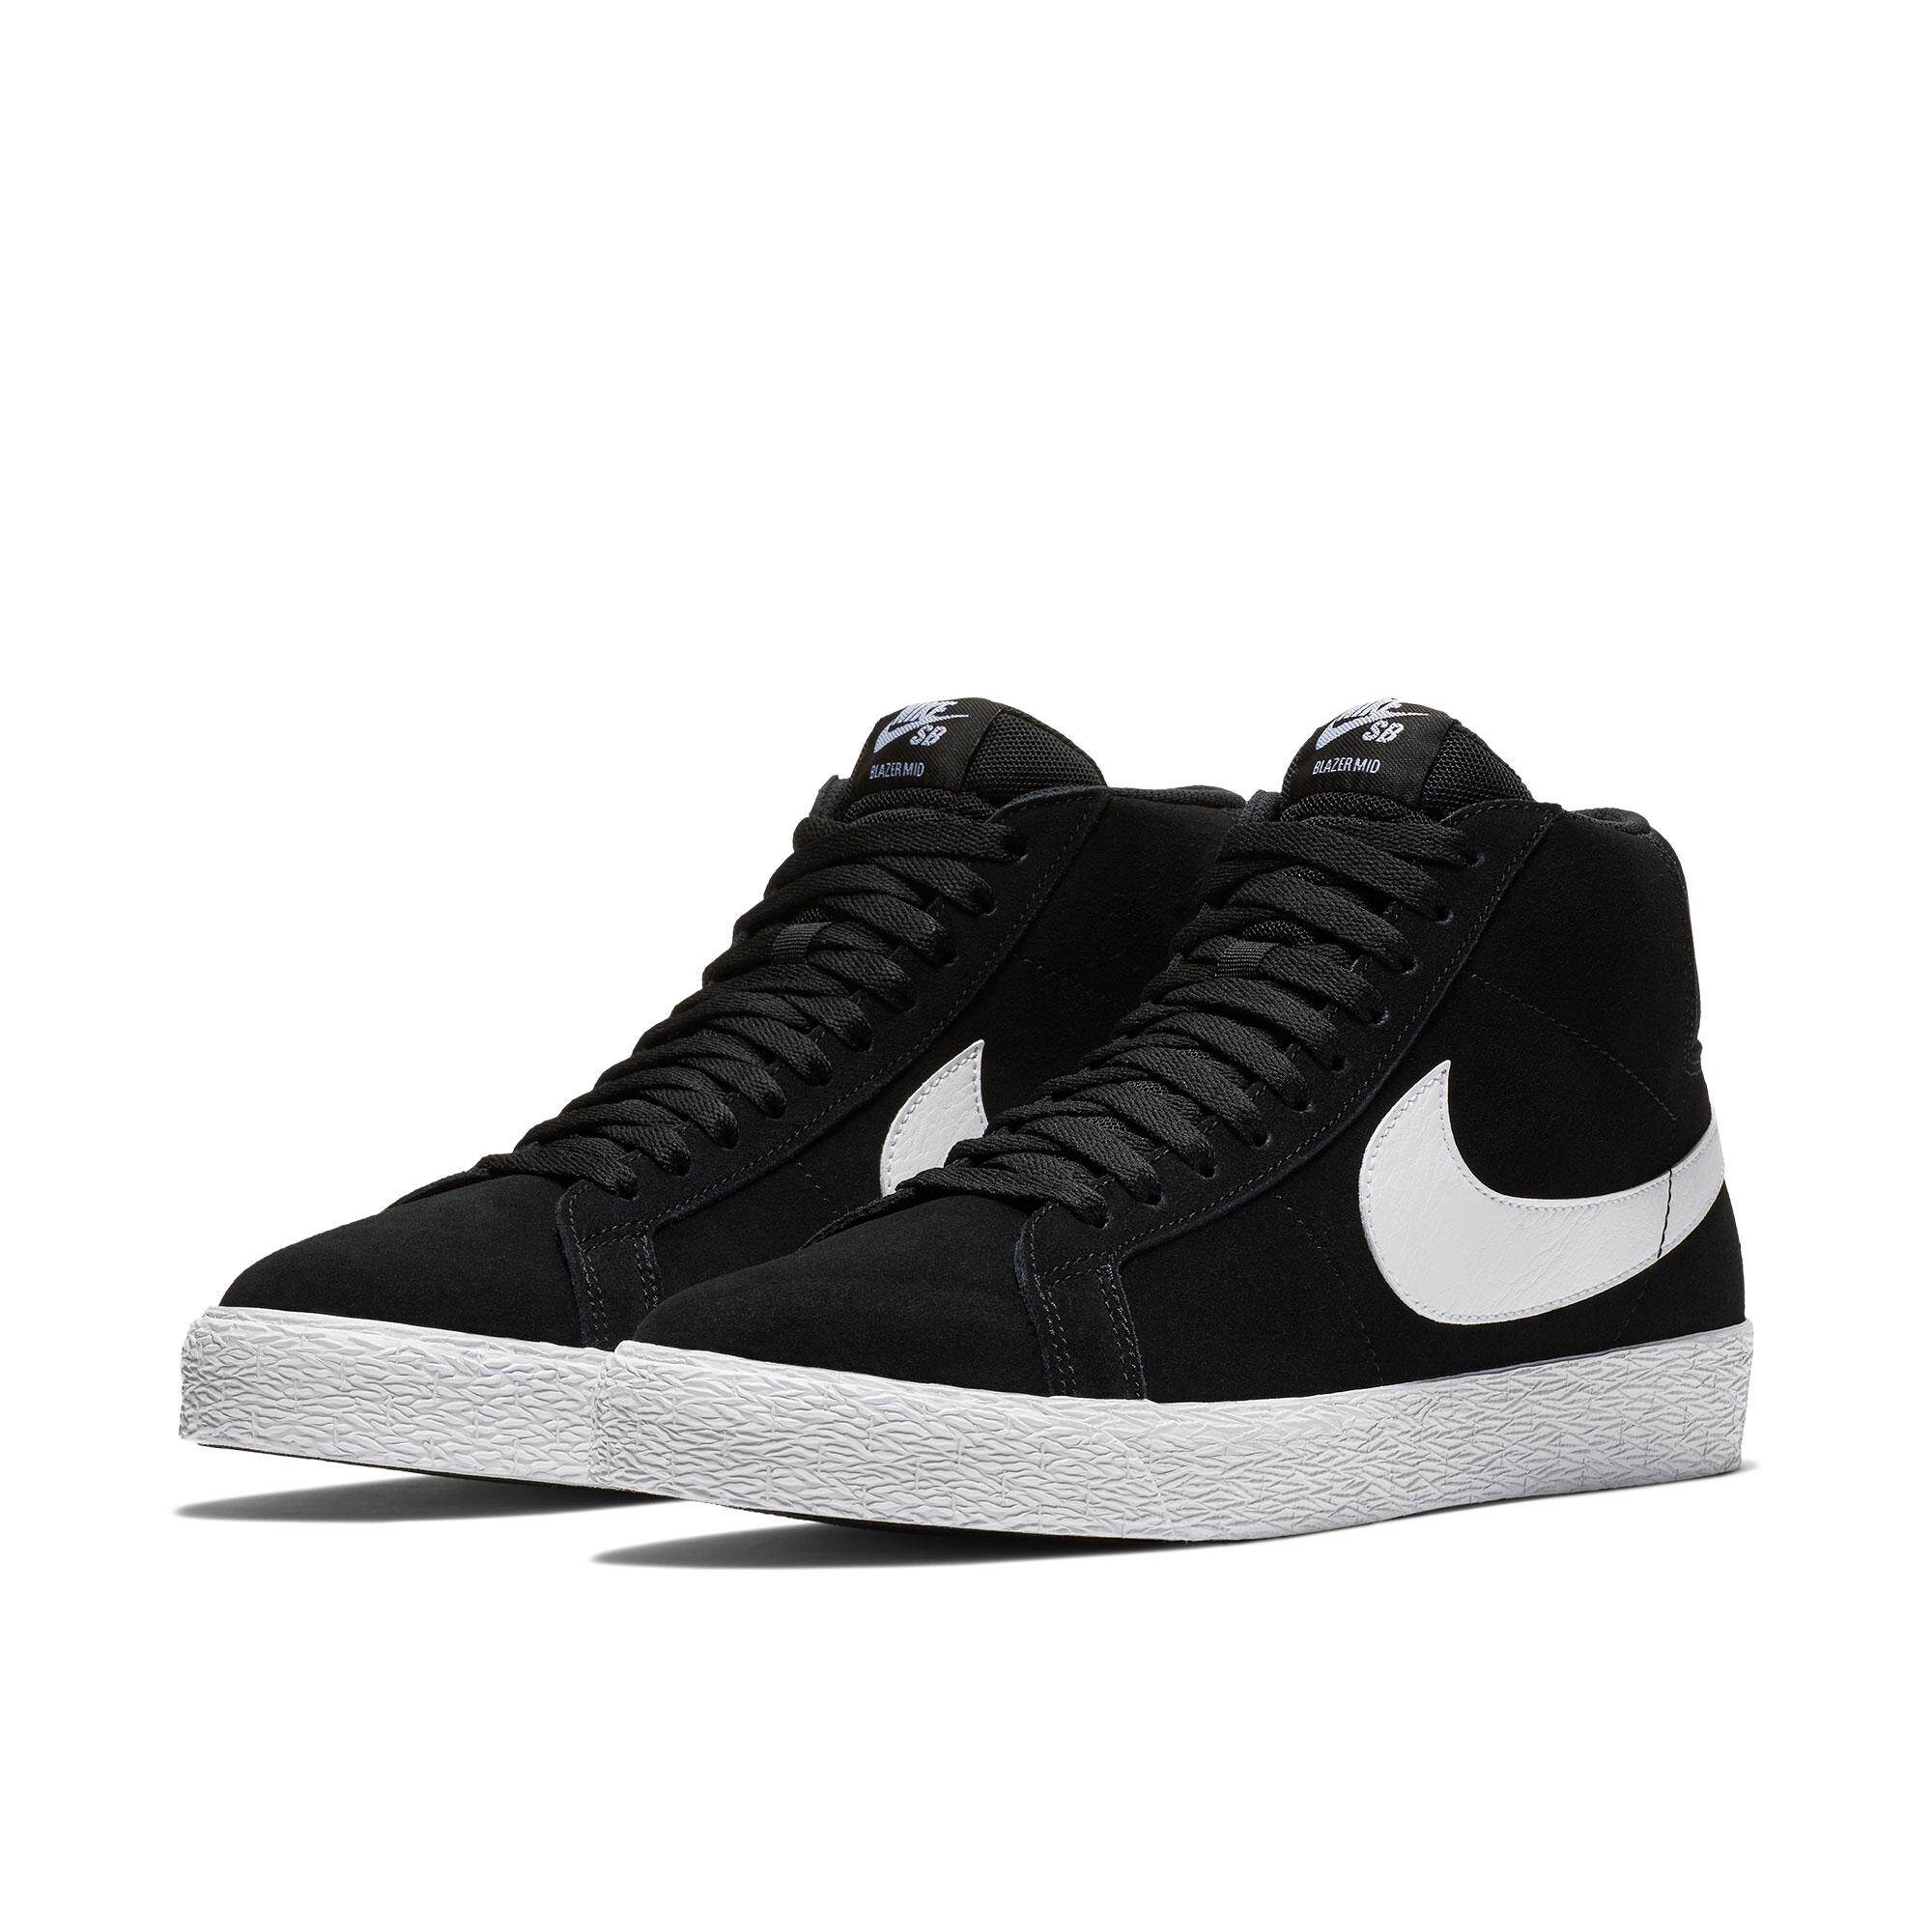 SB ZOOM BLAZER MID male / female skate shoes casual shoes lovers